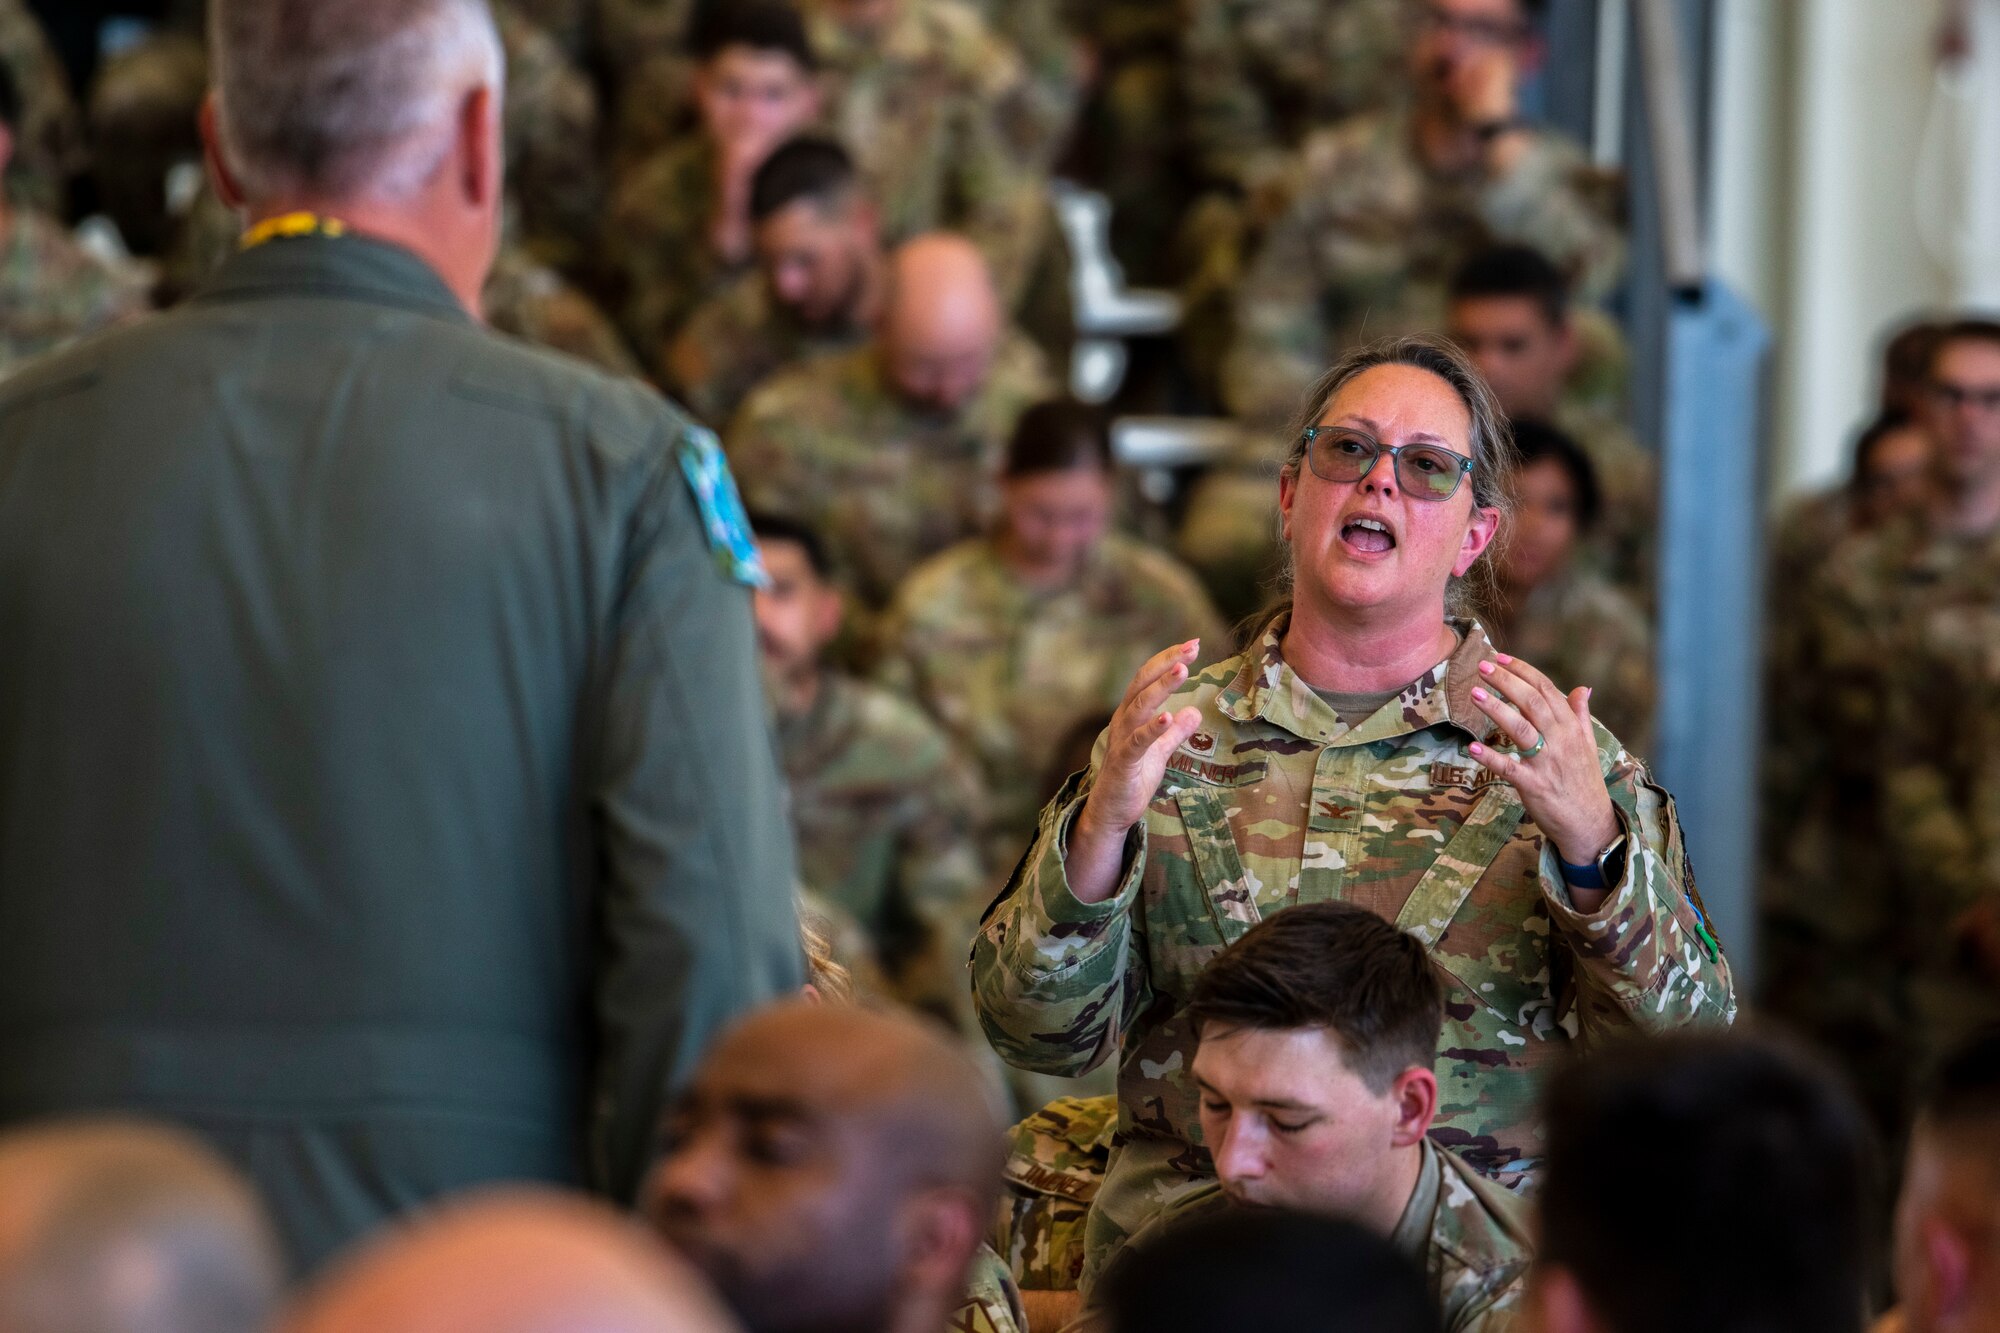 An Airman speaks in front of a a lot of other Airmen.